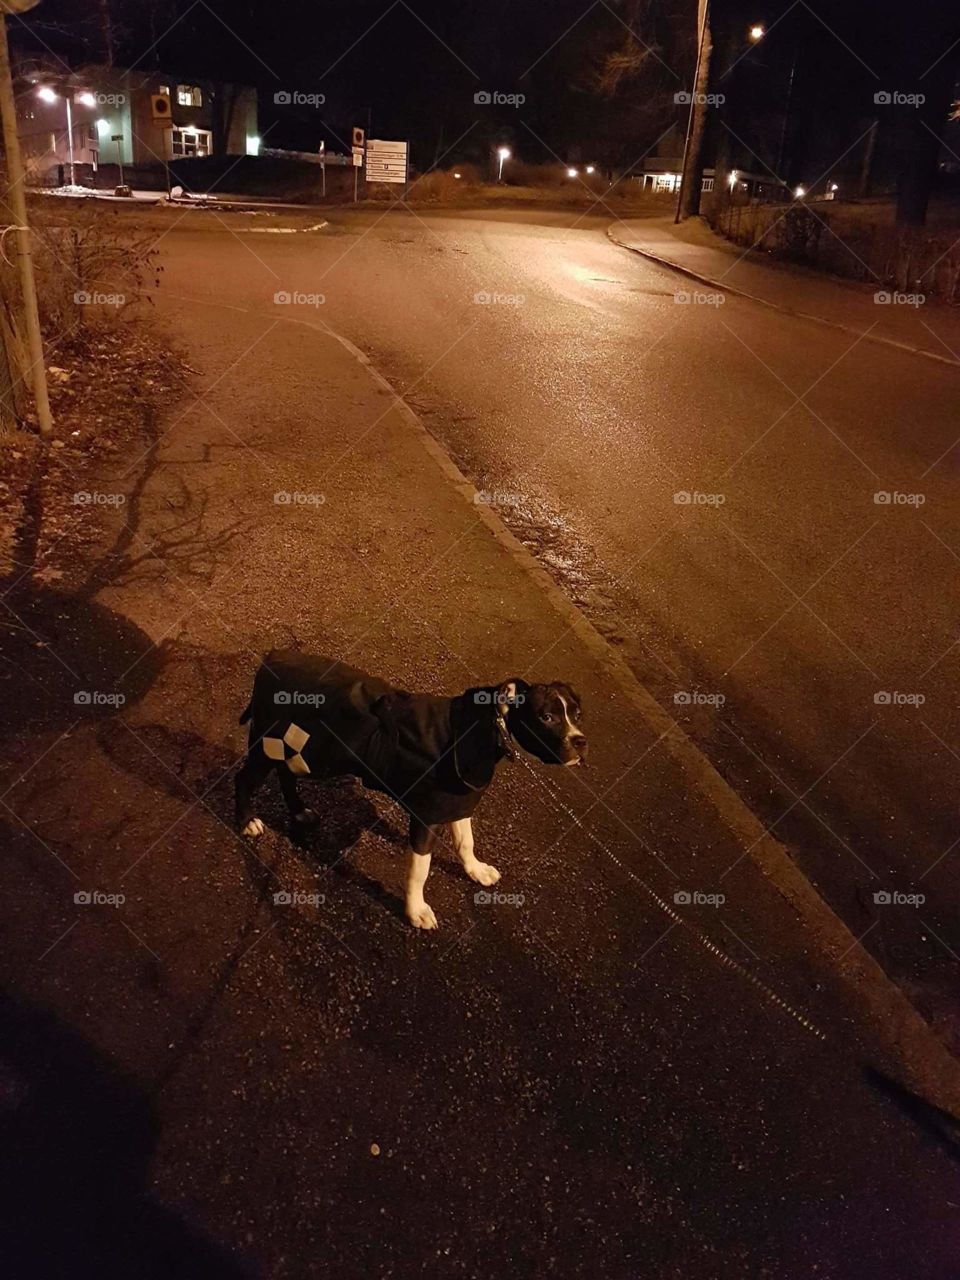 American staffordshire terrier going for a Walk at night